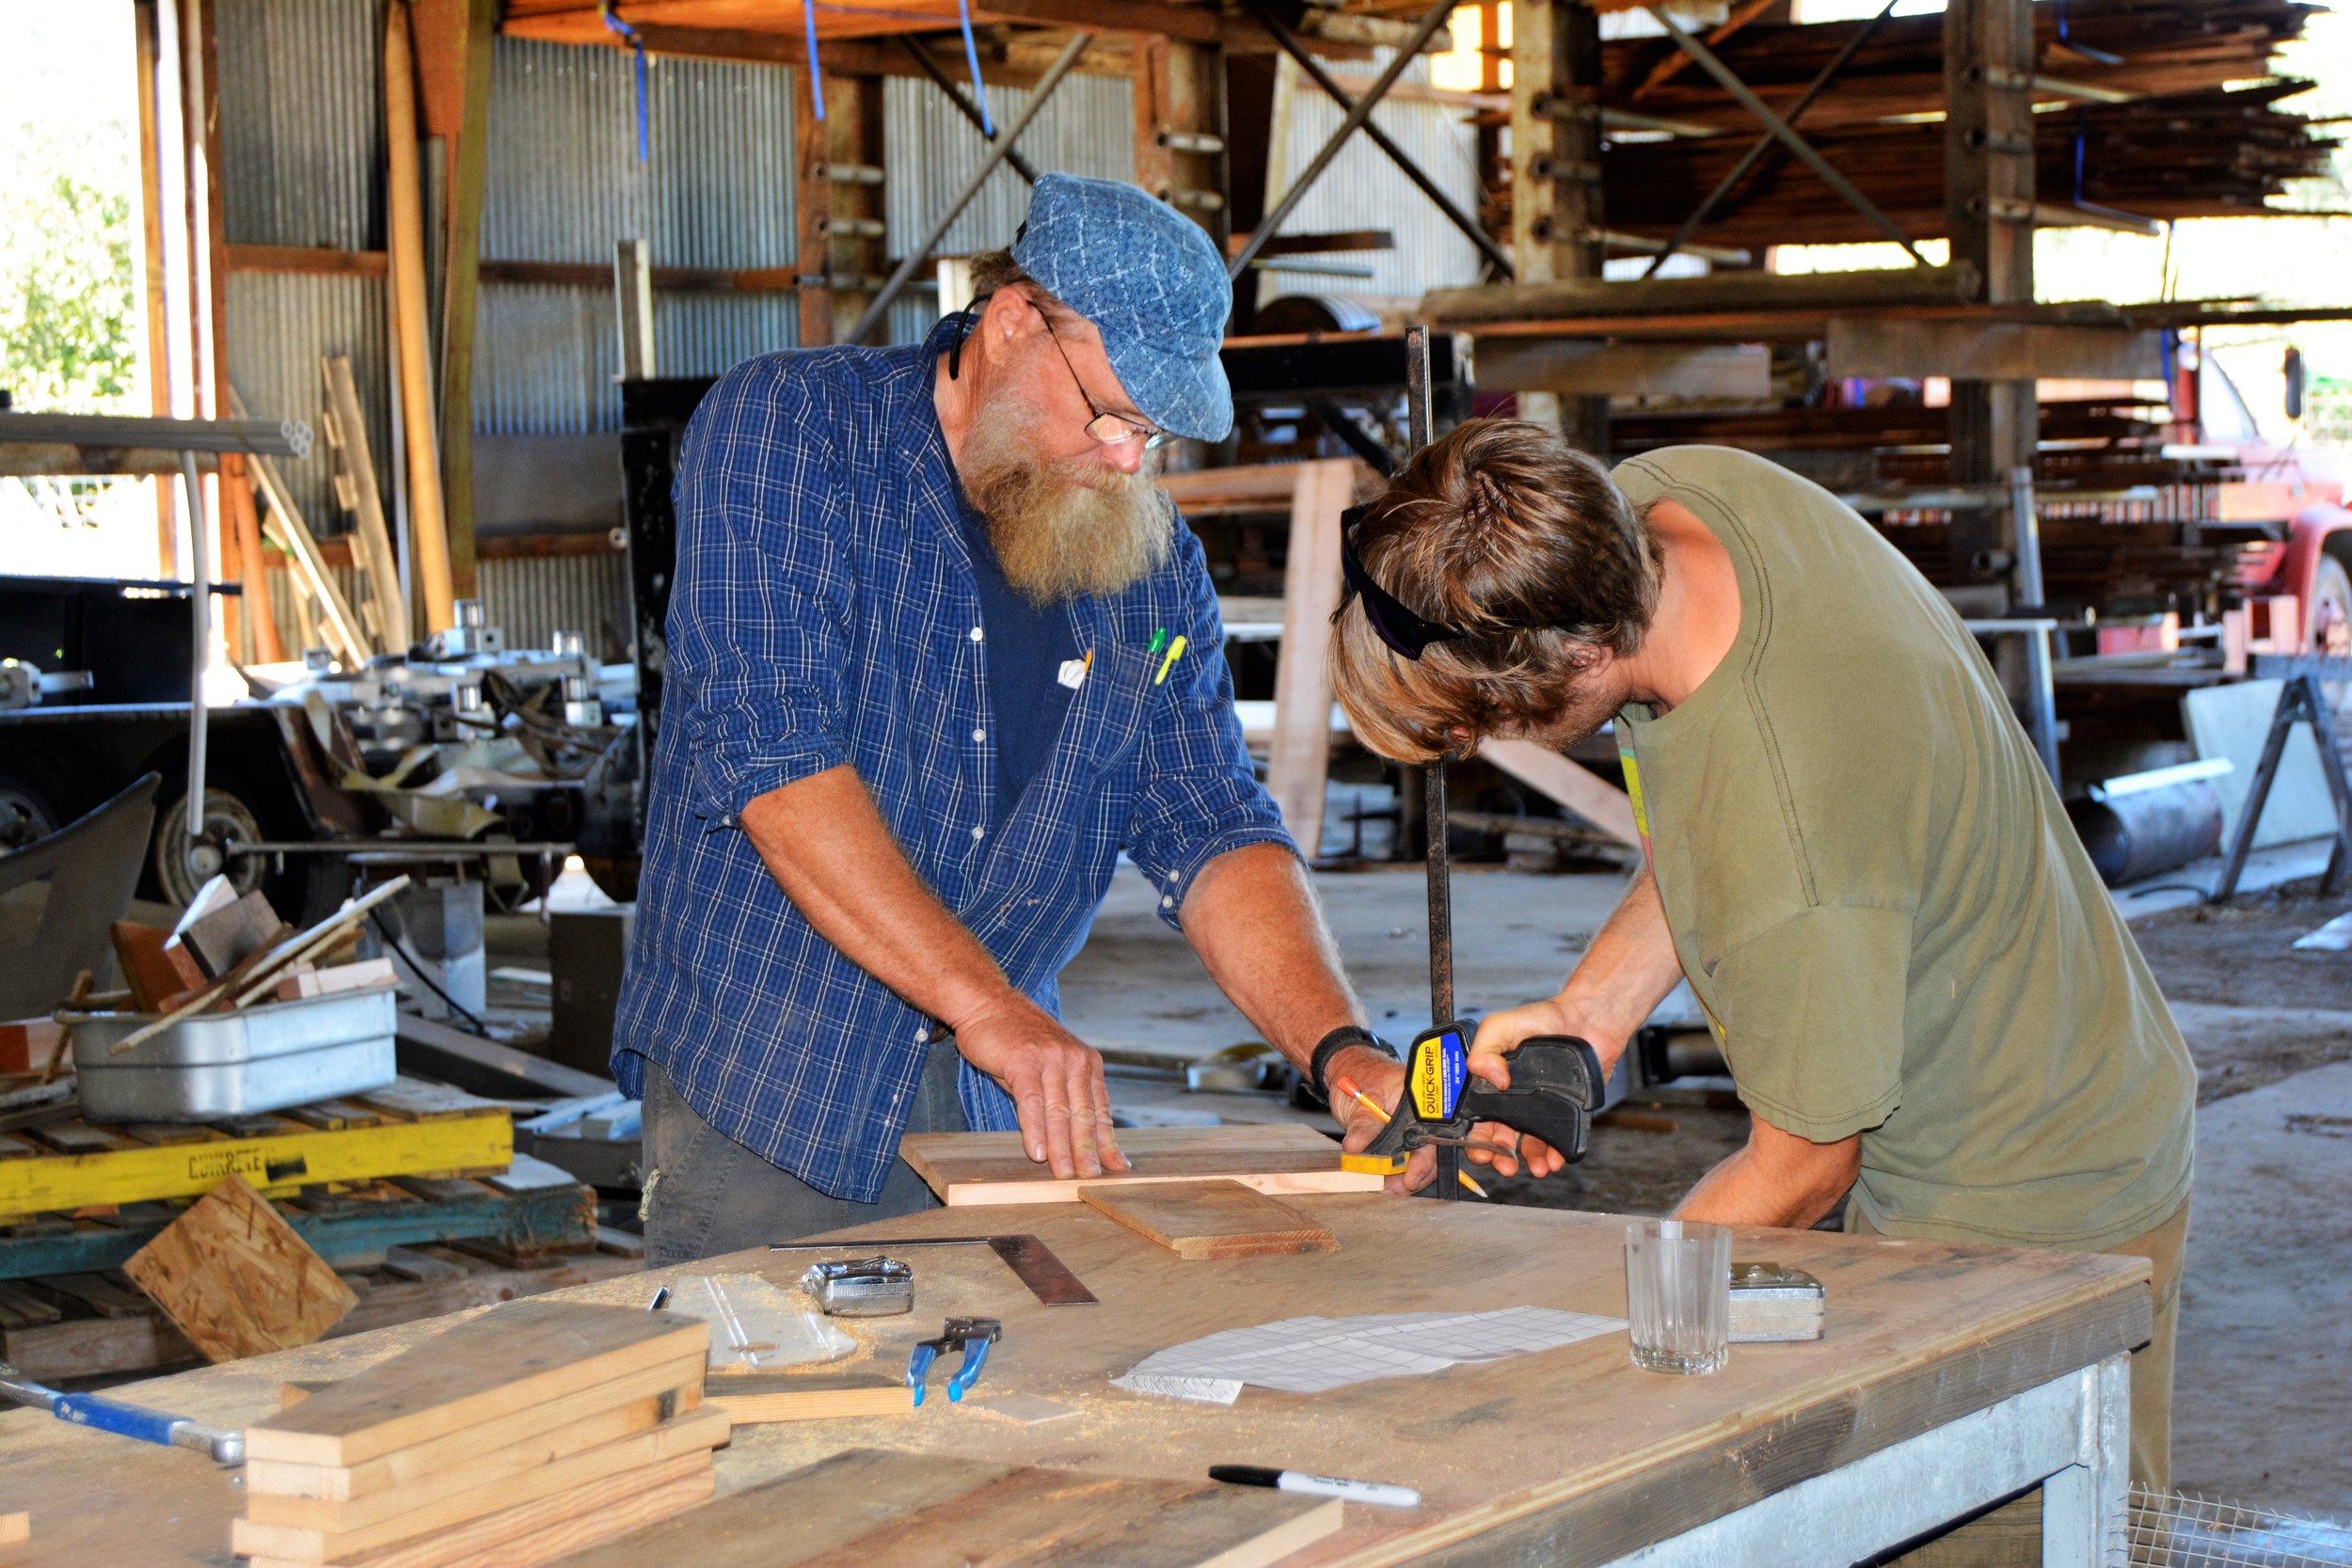 James and Steeve Moore building seed threshers in the Golden Rule woodshop.